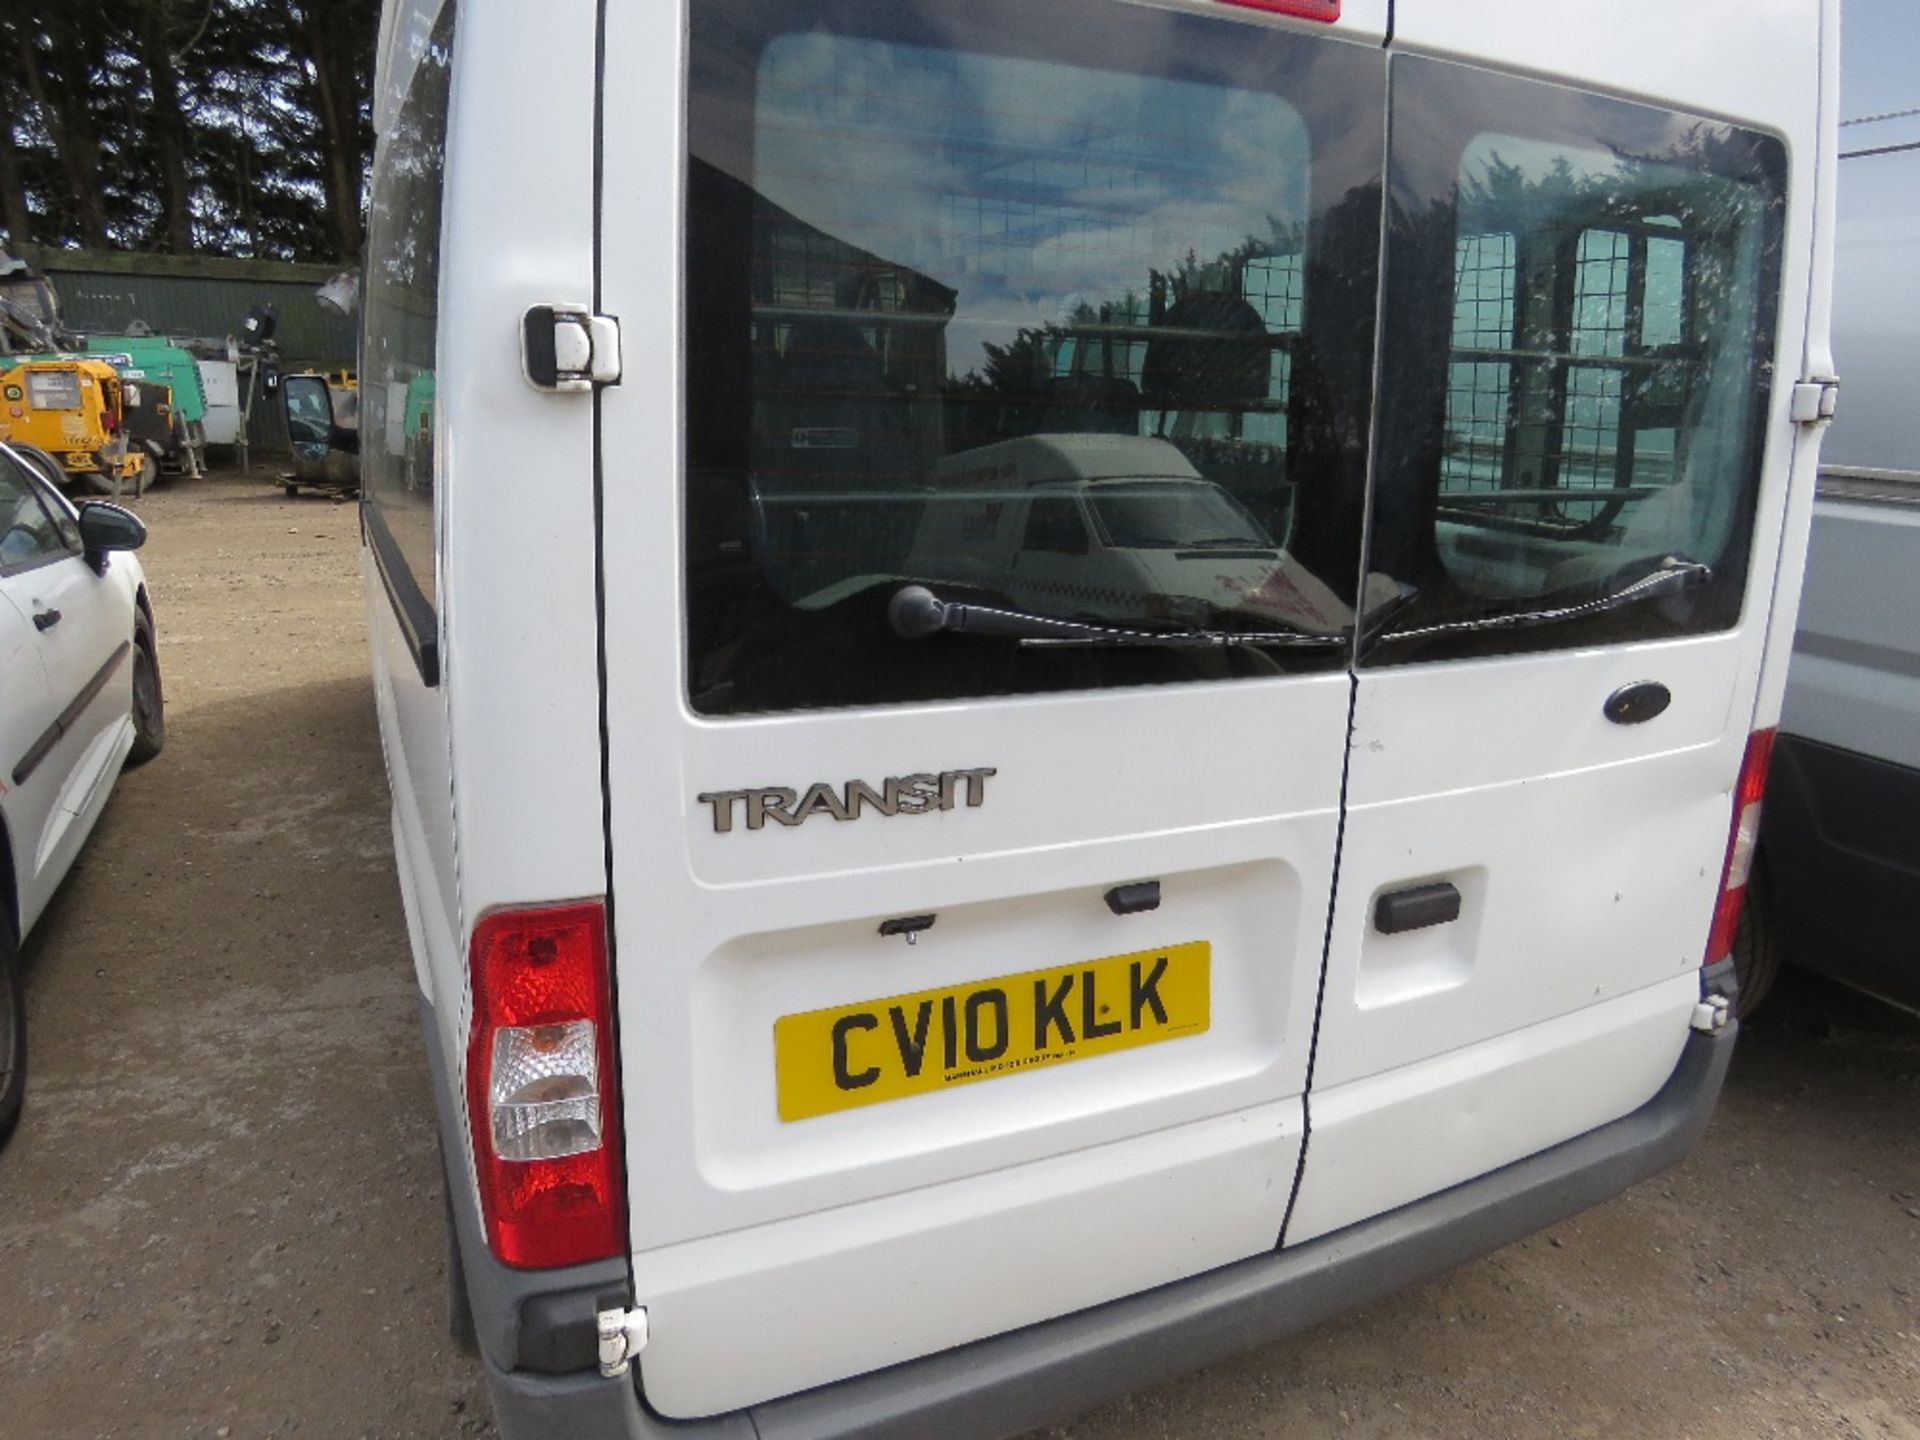 9 SEATER FORD TRANSIT MINI BUS WITH STORAGE BOOT REG: CV10 KLK TESTED TILL 22/2/21. DIRECT EX LOCAL - Image 5 of 7